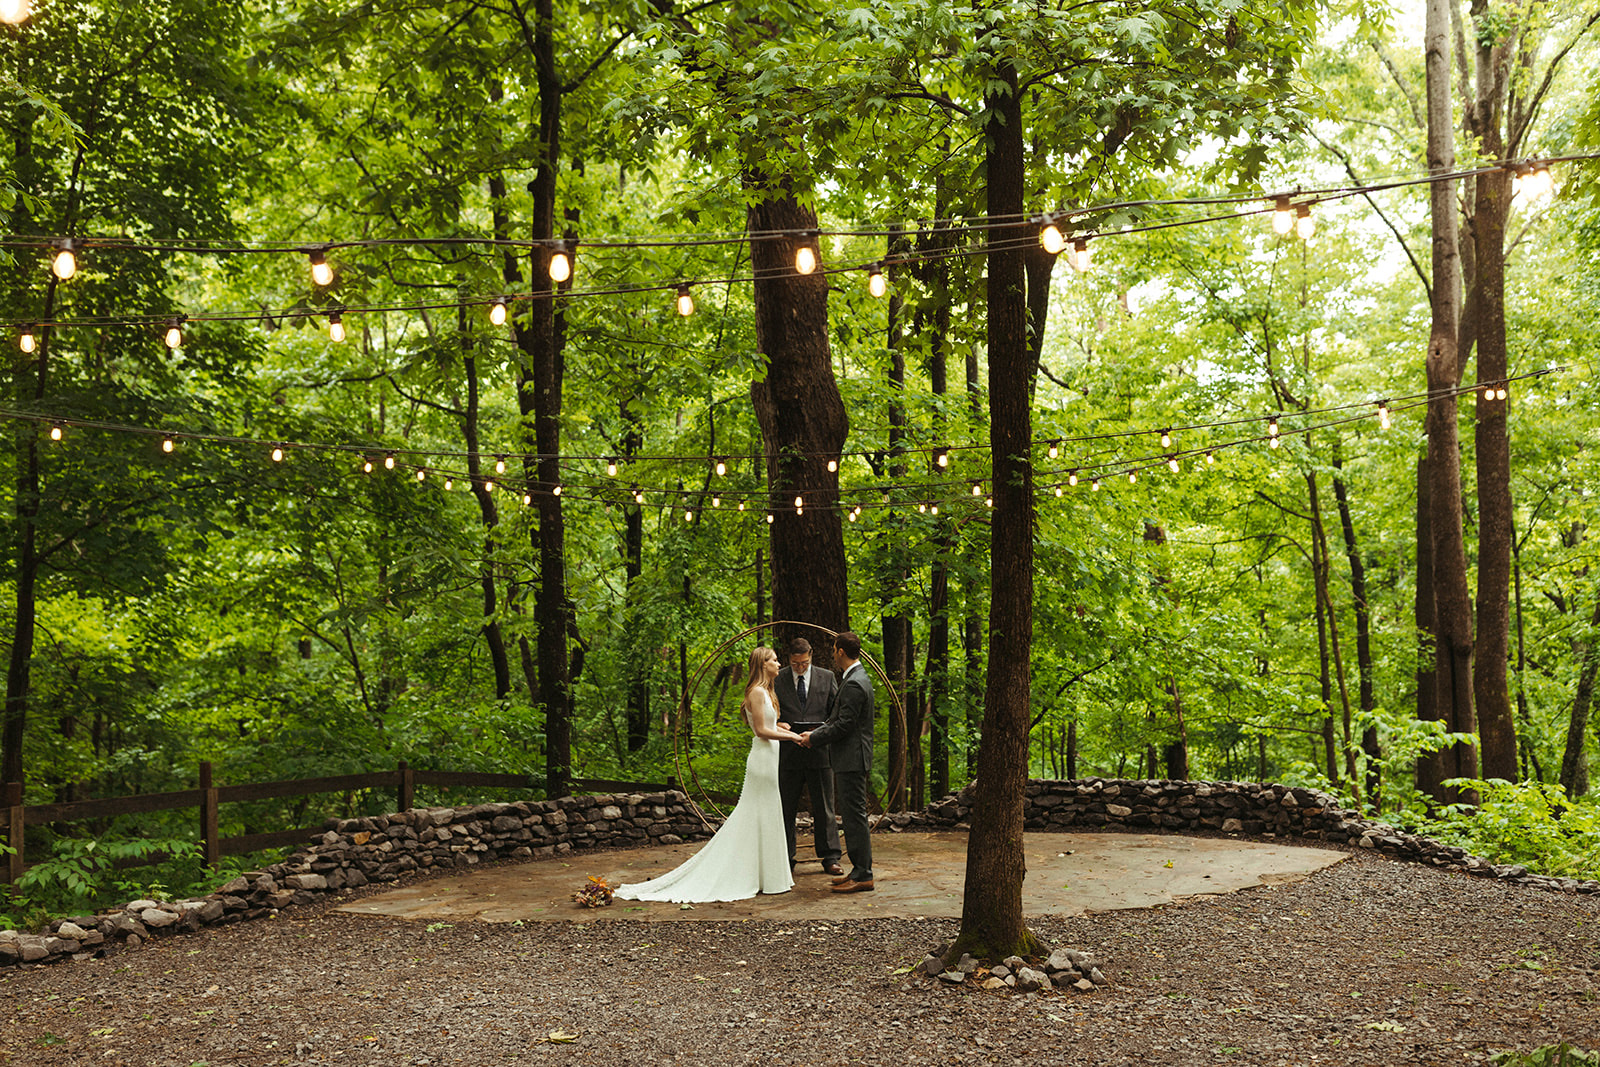 Intimate wedding in the forest